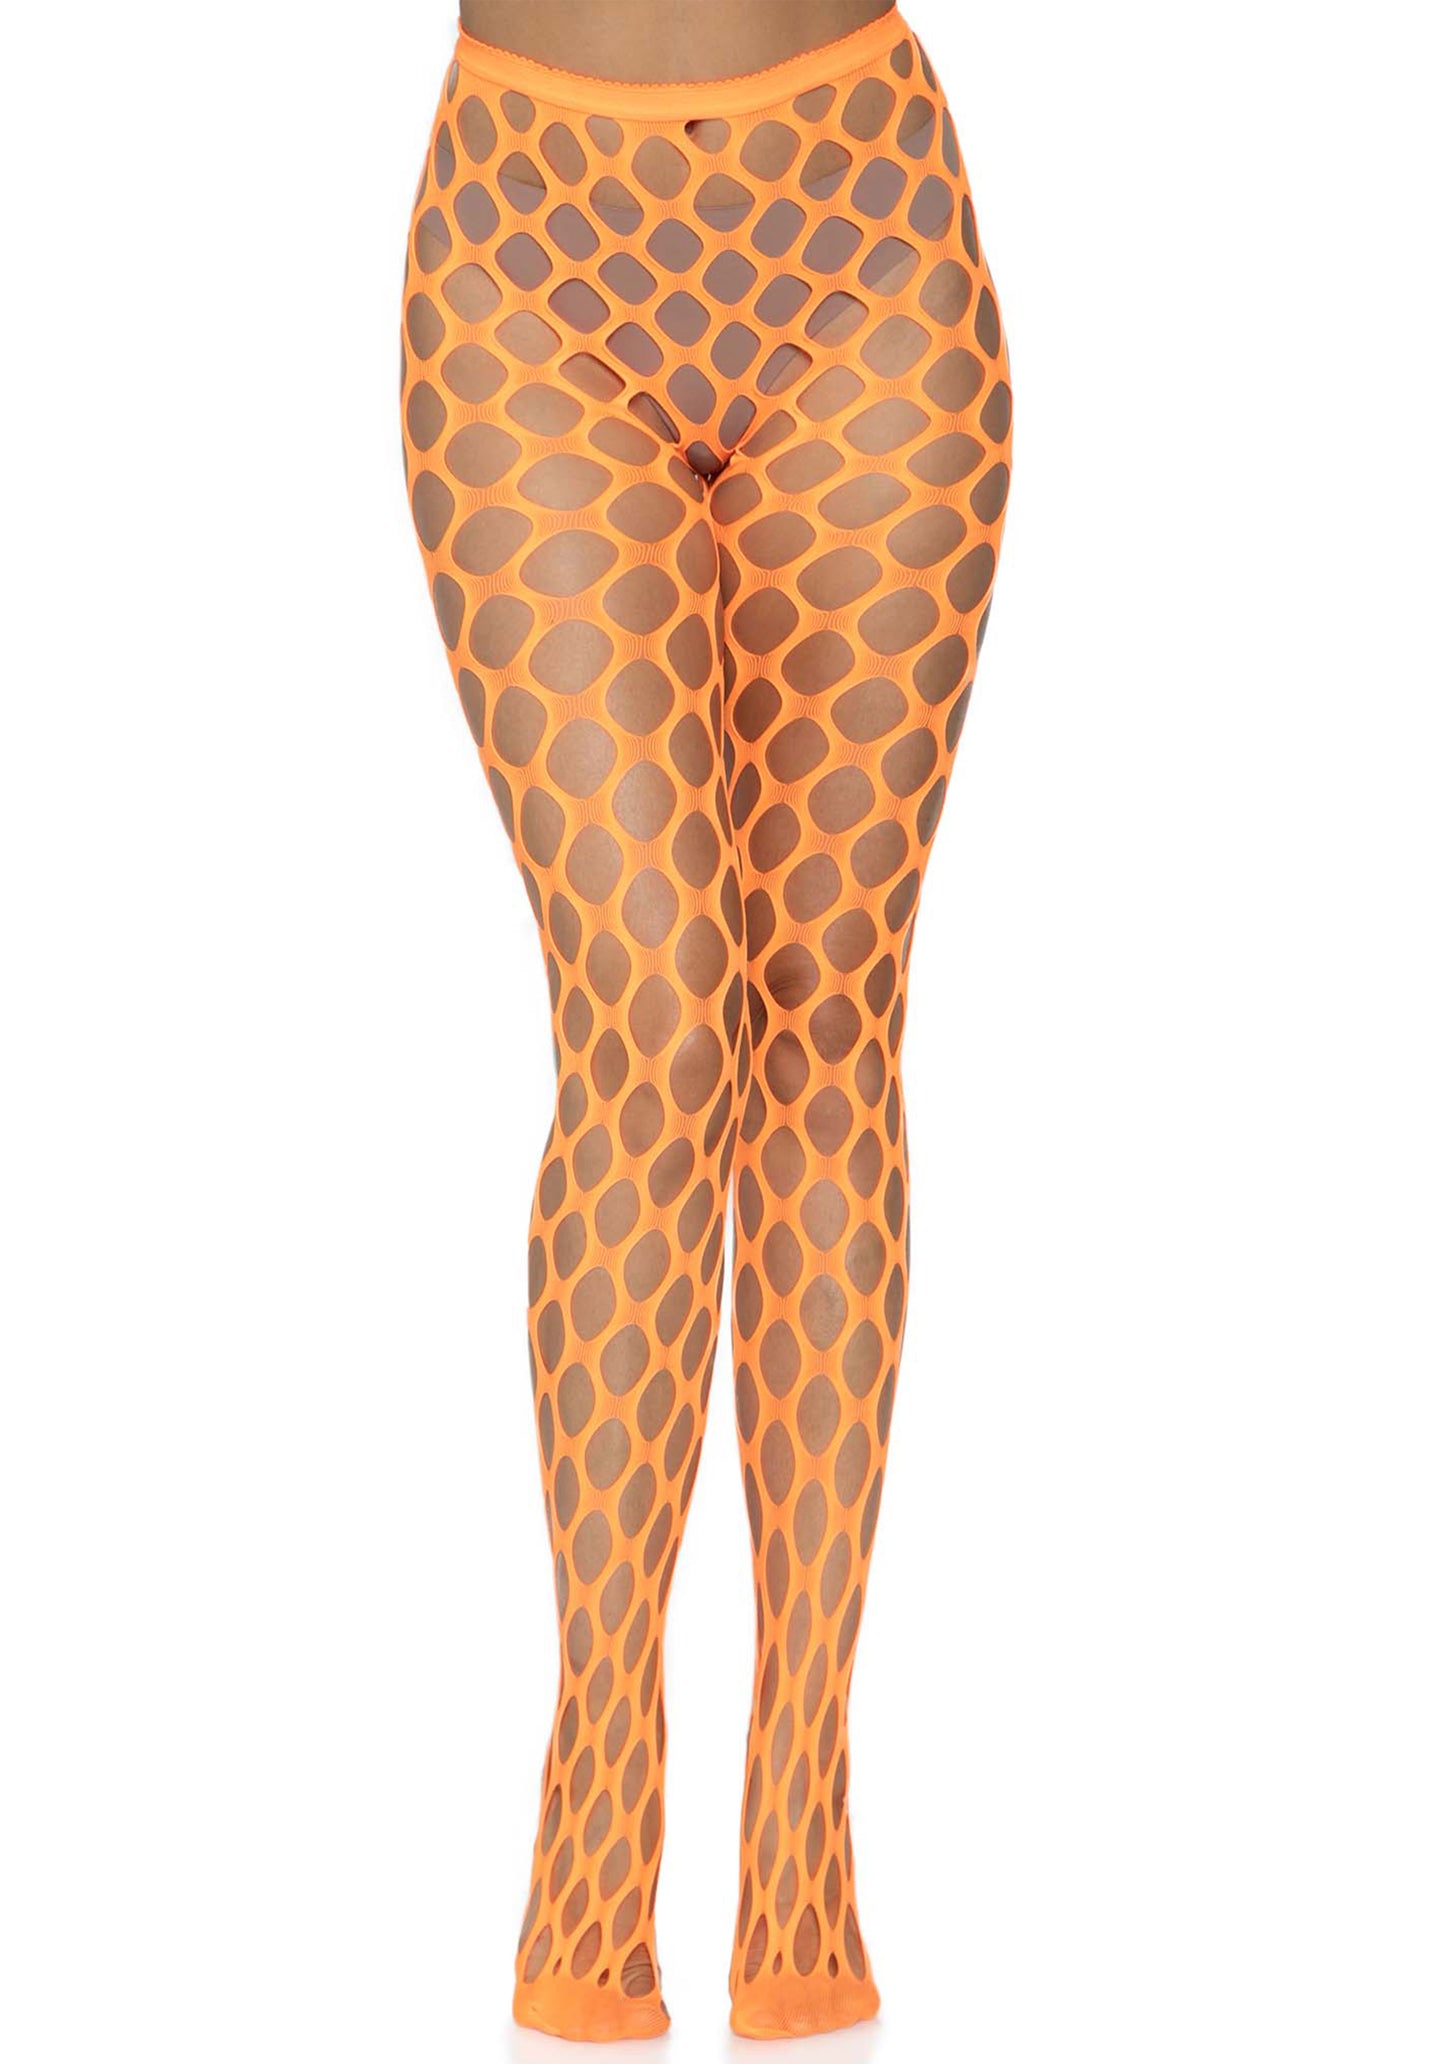 Leg Avenue 9331 Pothole Fishnets - Bright neon orange wide thick circular fishnet tights with micro mesh toe and seamless body. Perfect for festivals, clubs and raves.